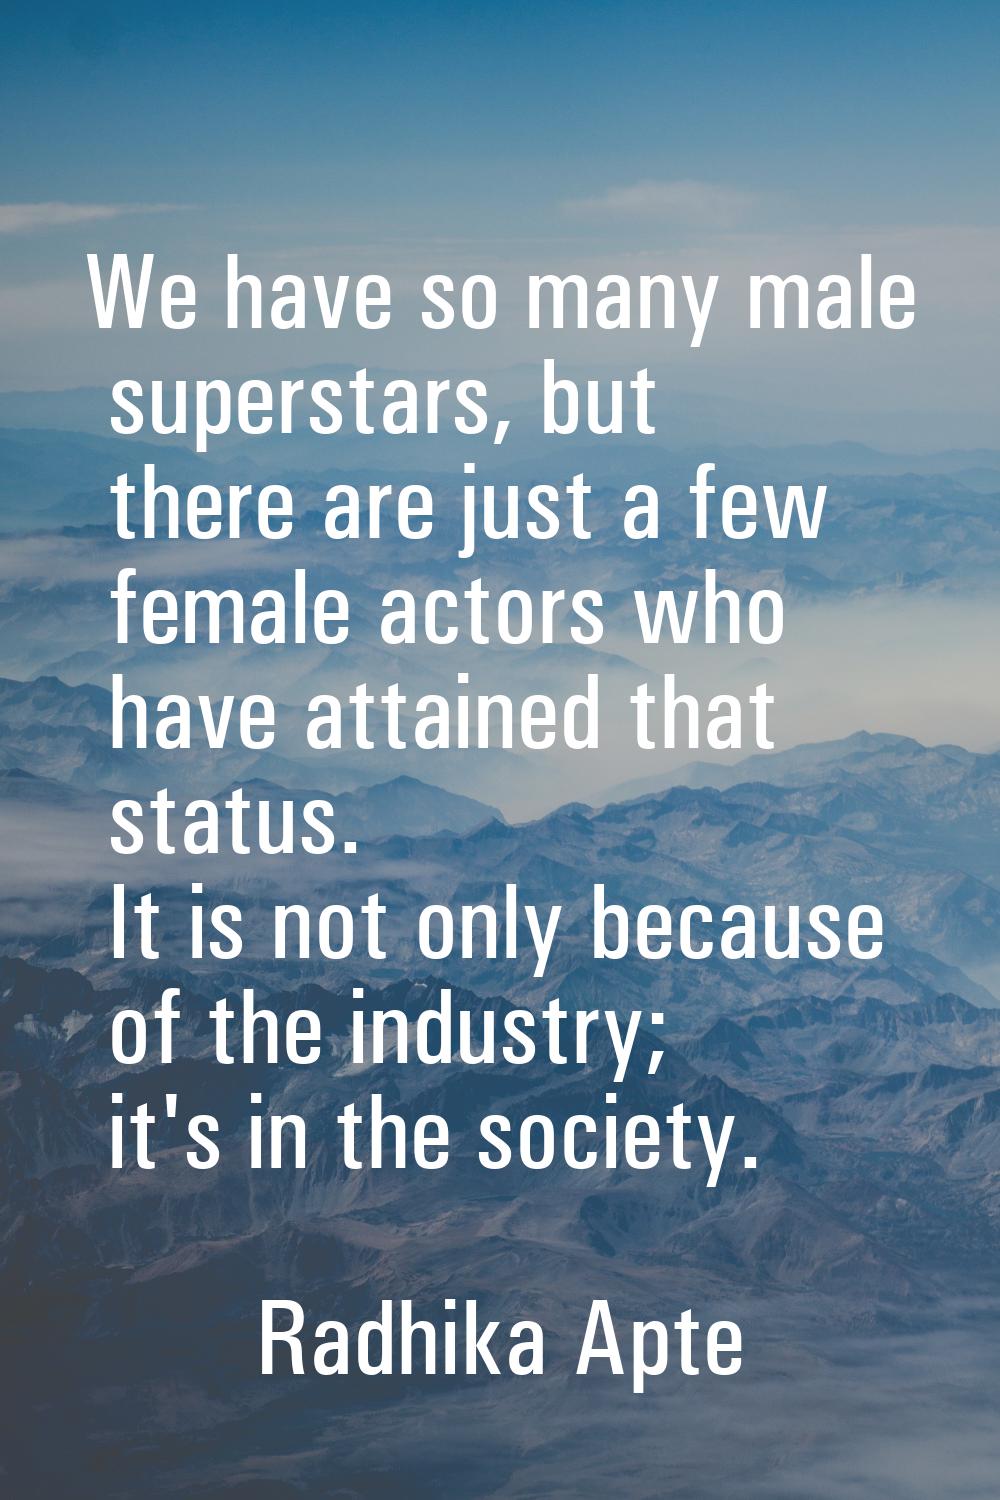 We have so many male superstars, but there are just a few female actors who have attained that stat